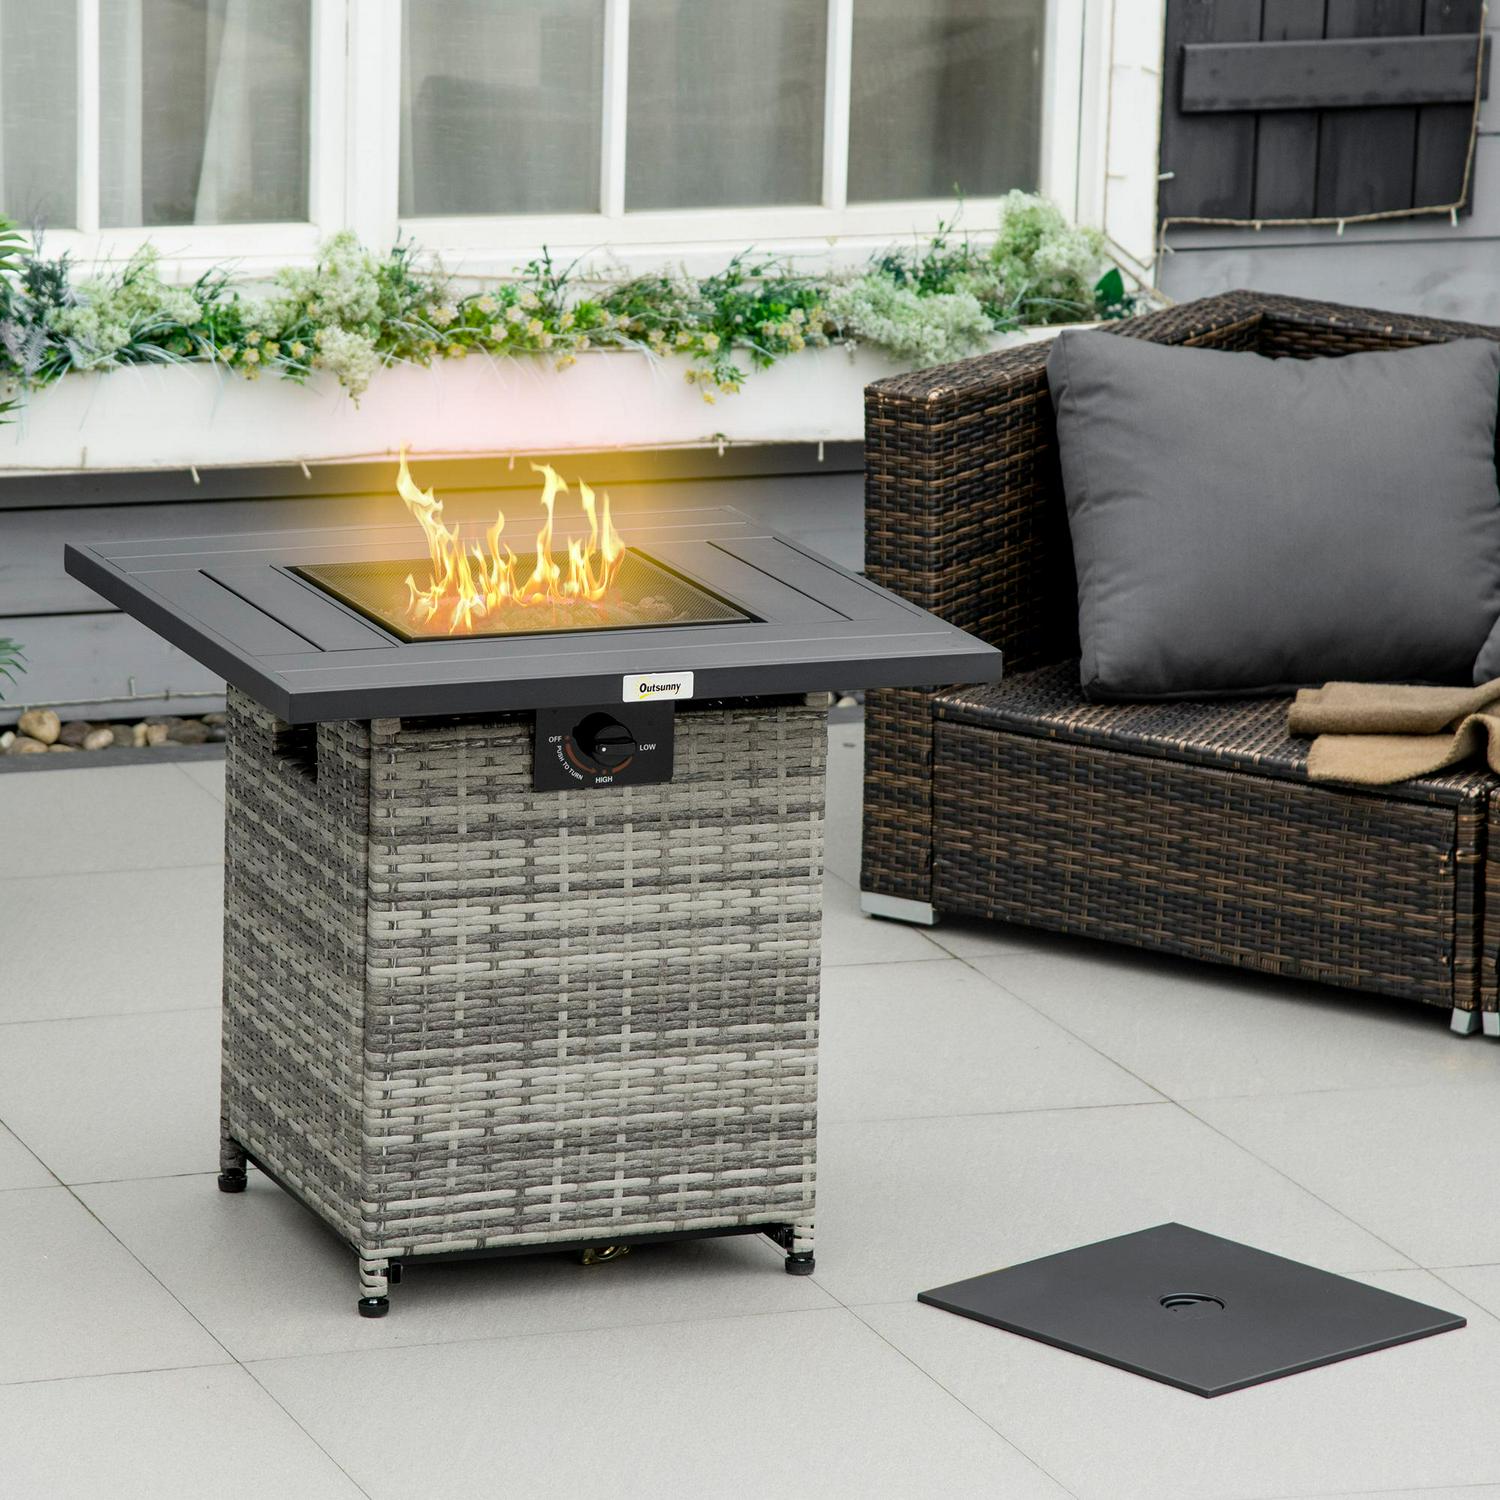 Outdoor PE Rattan Gas Fire Pit Table, Patio Square Propane Heater With Rain Cover, Mesh Lid And Lava Stone, 40,000 BTU, Mixed Grey